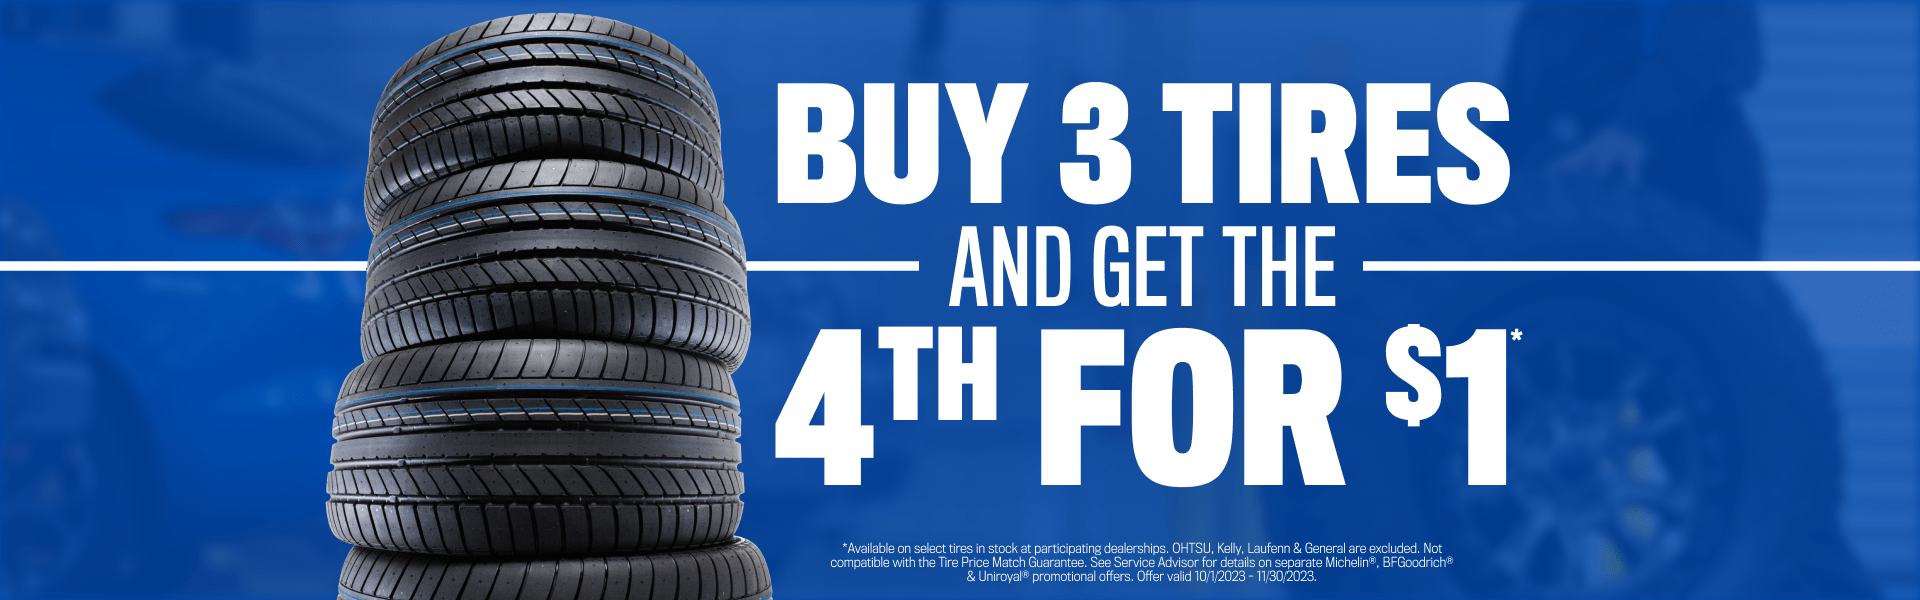 Buy 3 Get 4th for $1